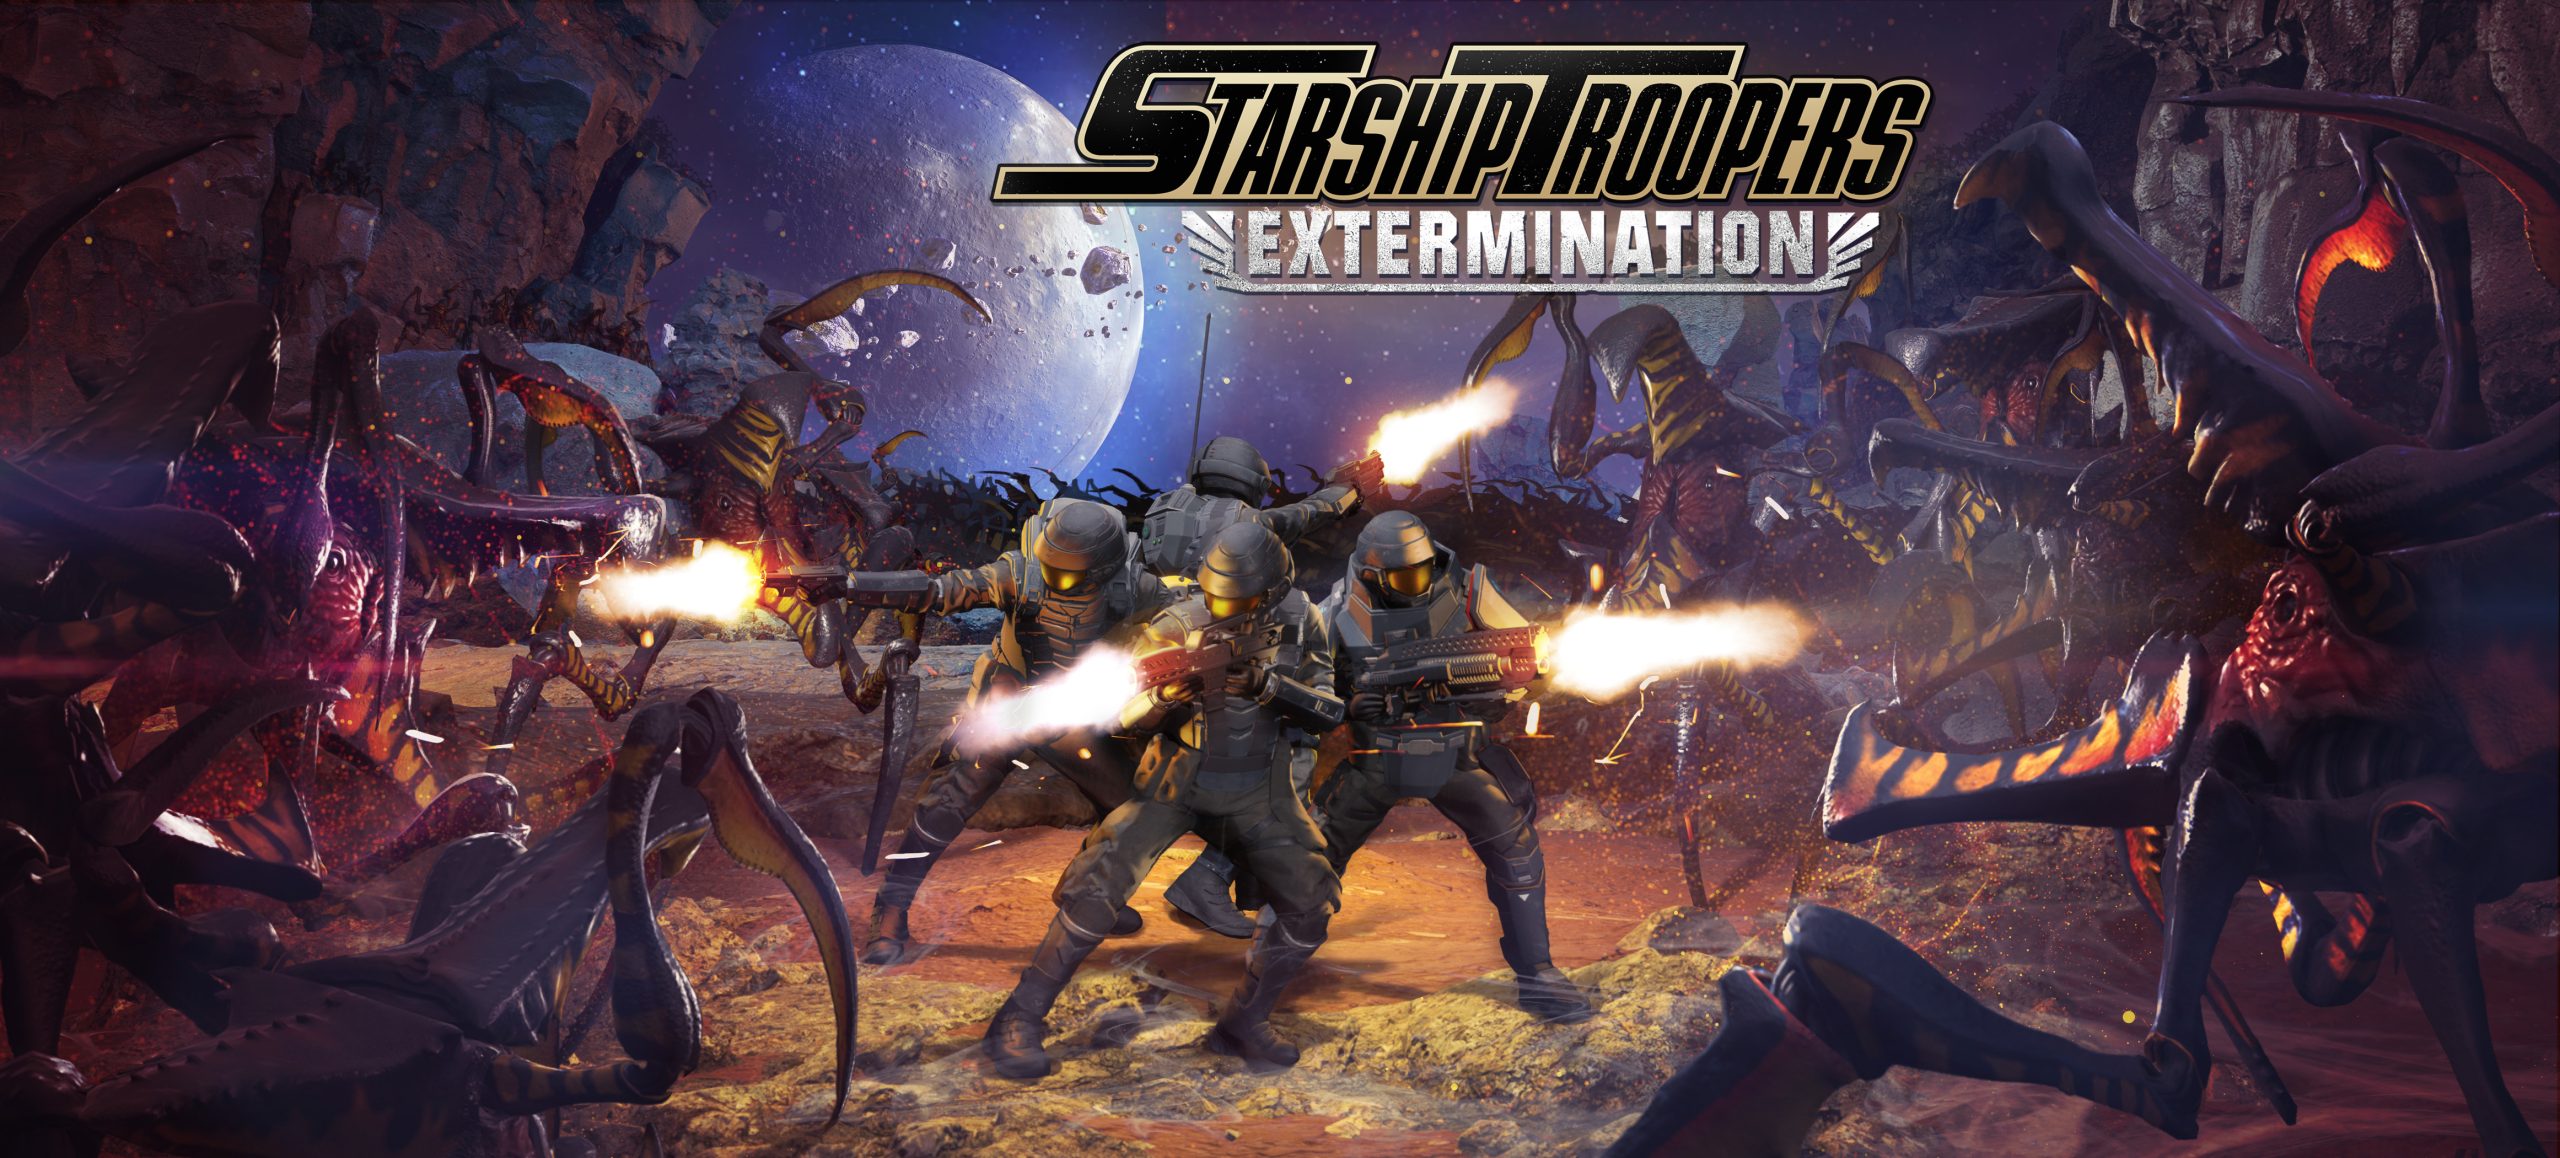 Starship Troopers: Extermination Early Access Review (PC)